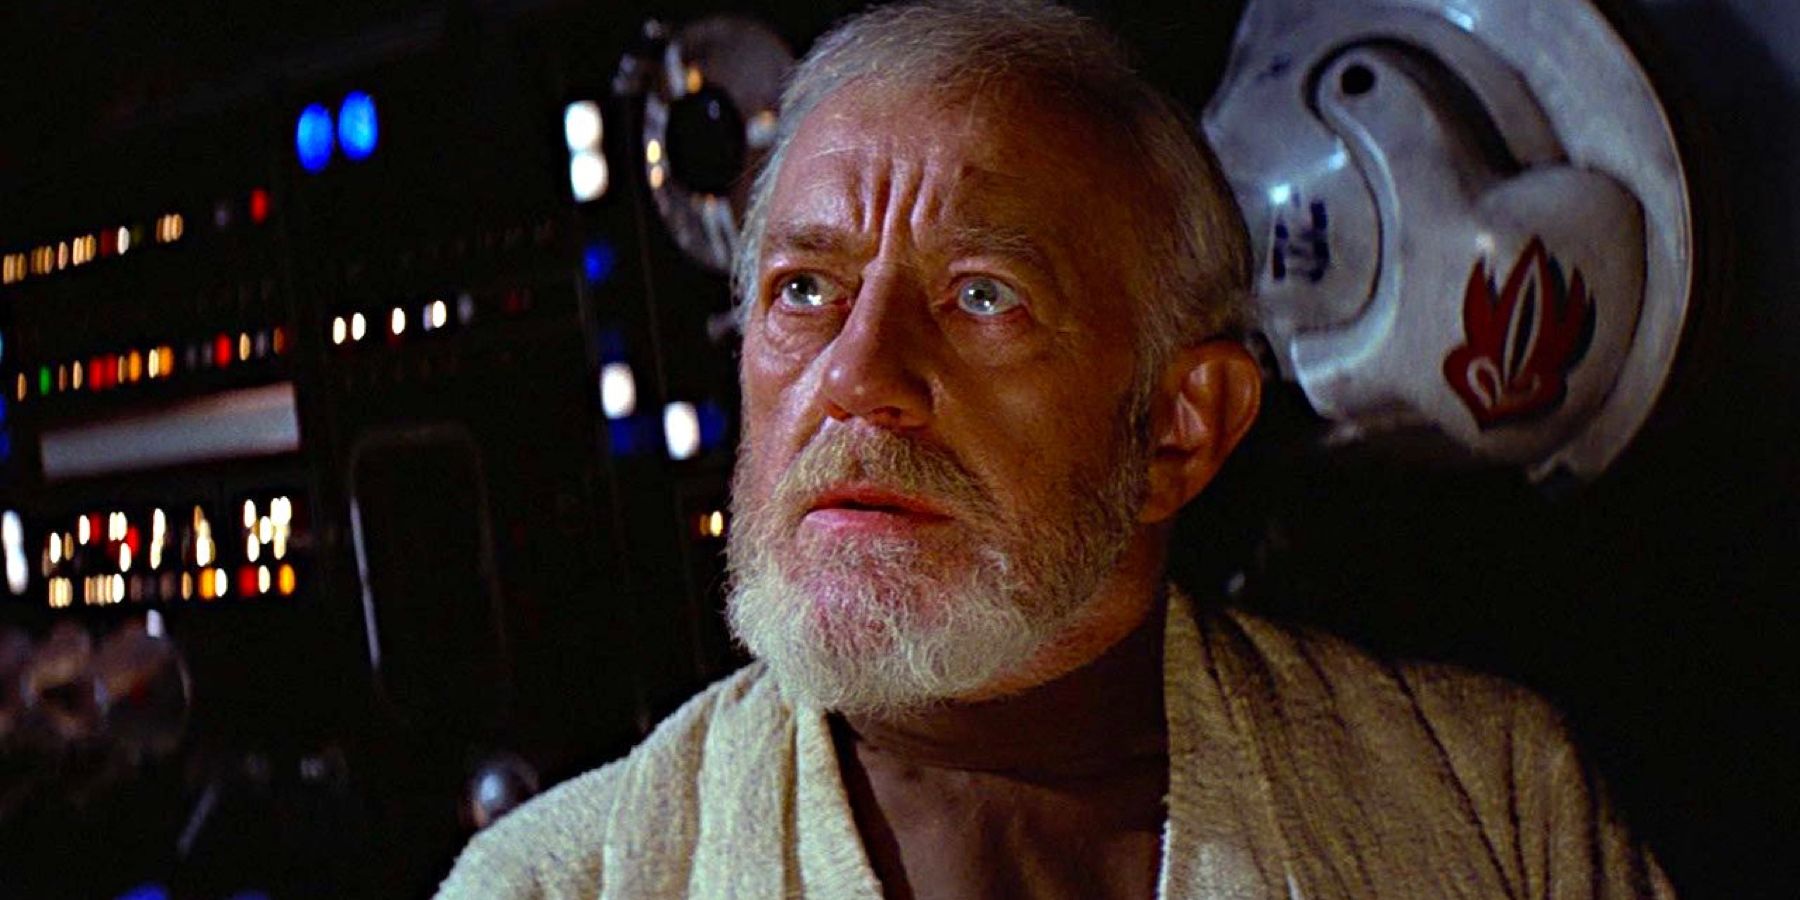 Obi-Wan Kenobi looks wary while sitting in the Millennium Falcon in Star Wars: Episode IV - A New Hope.Obi-Wan Kenobi (played by actor Sir Alec Guinness), looks wary while sitting in the Millennium Falcon in Star Wars: Episode IV - A New Hope.